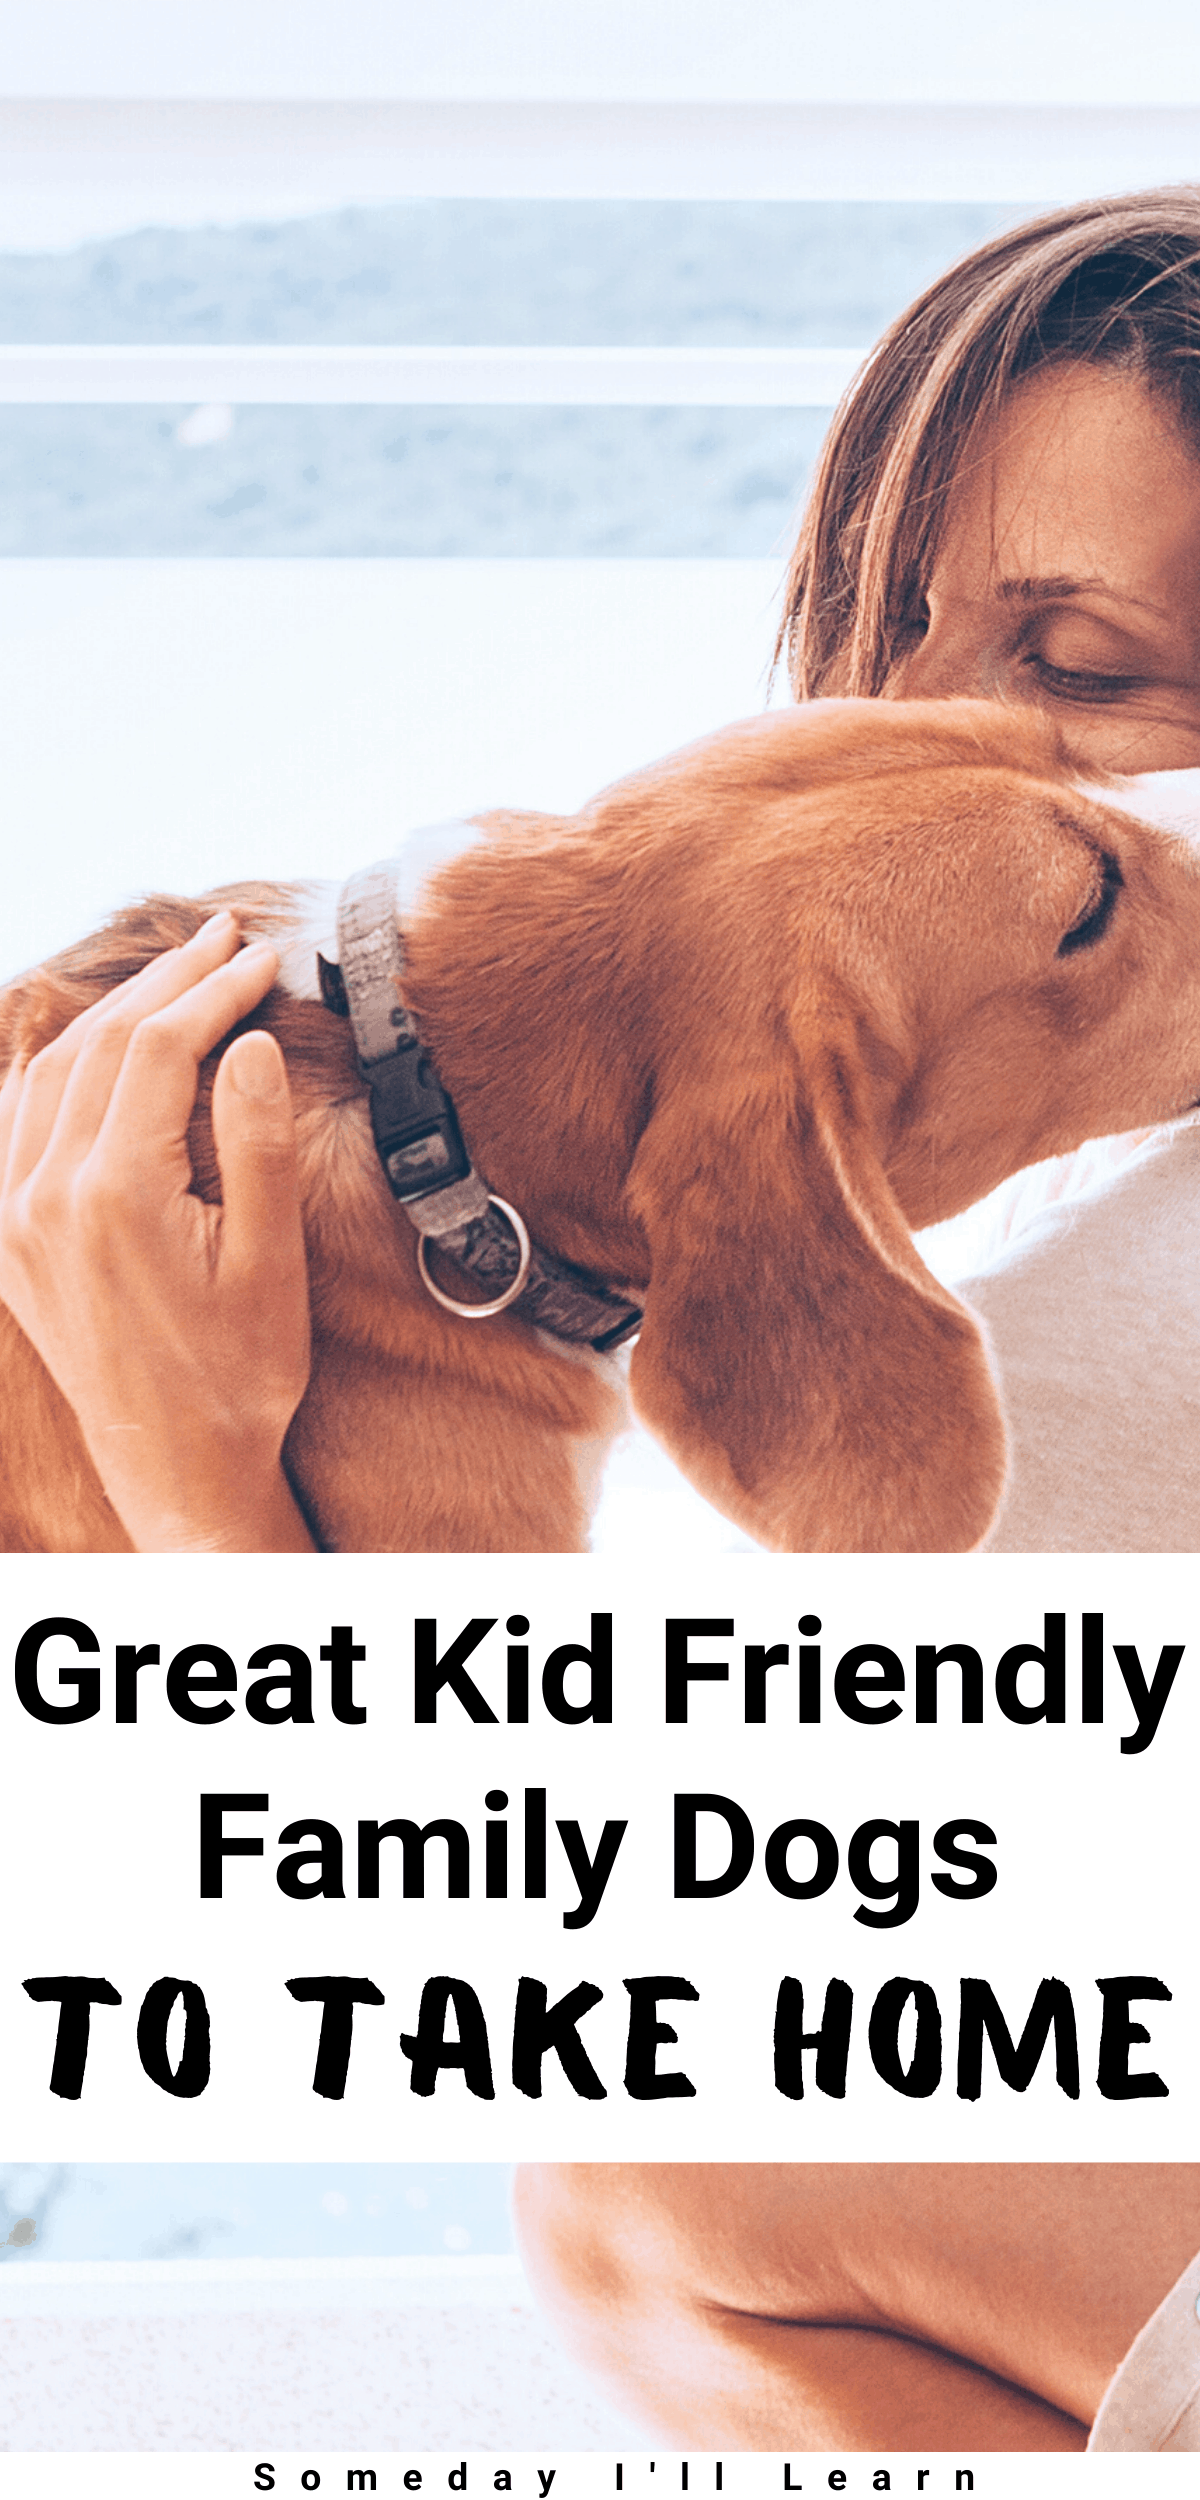 Great kid friendly family dogs